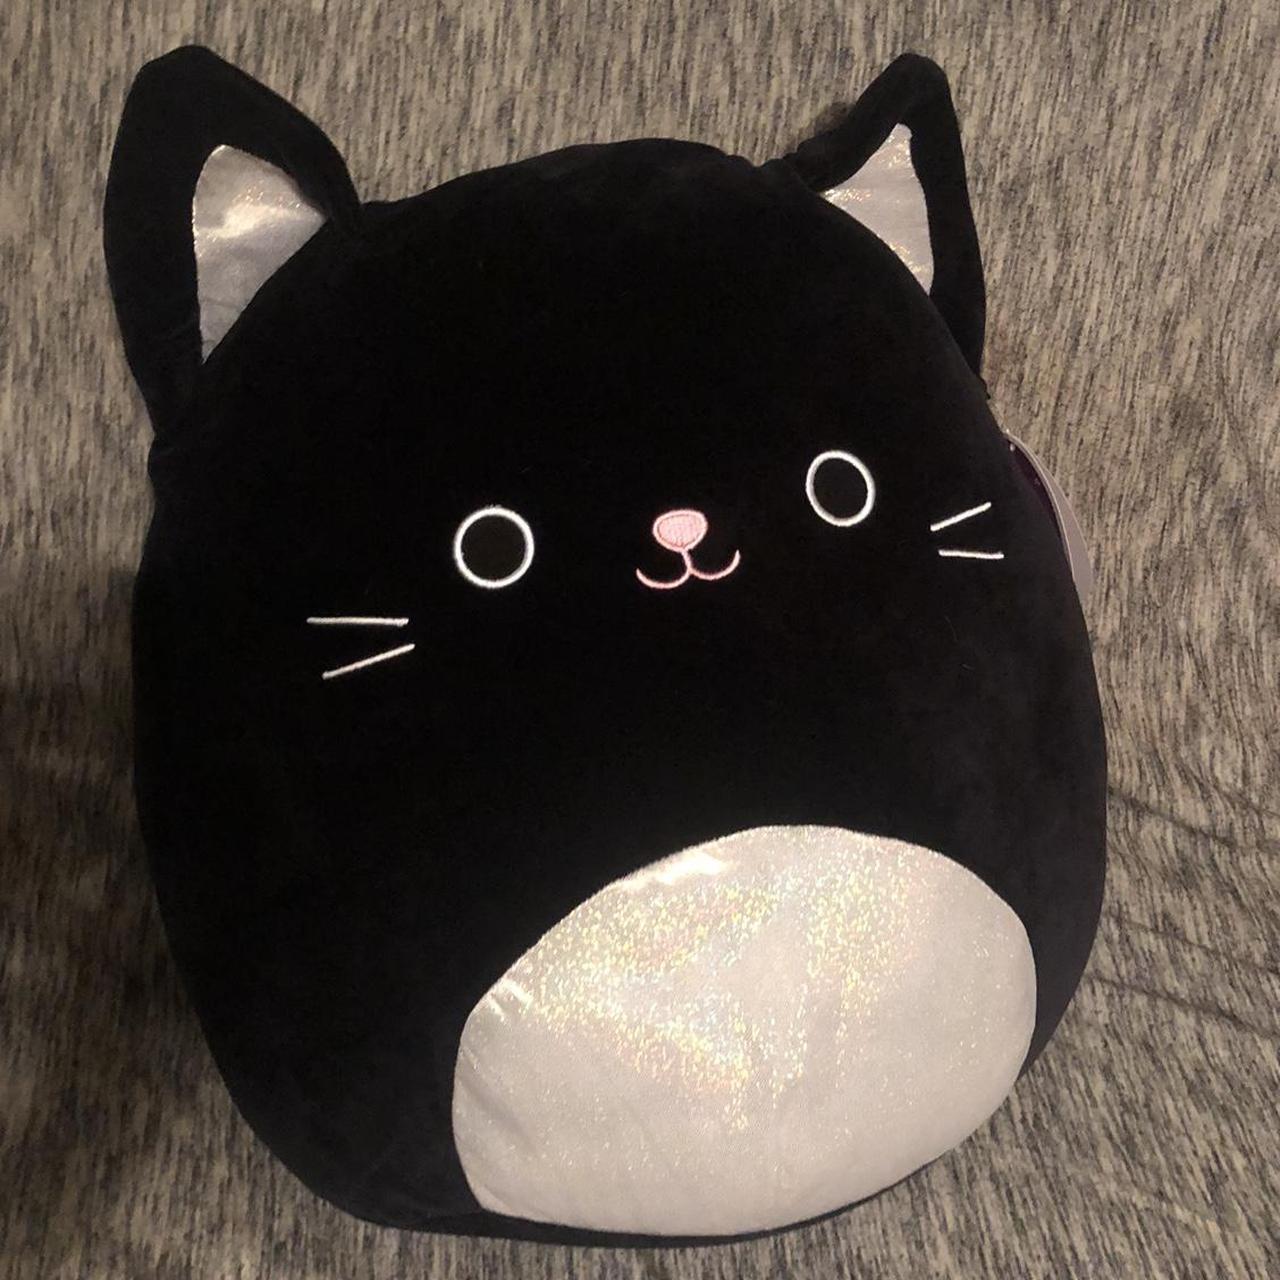 Product Image 1 - 2021 16in autumn squishmallow

new with